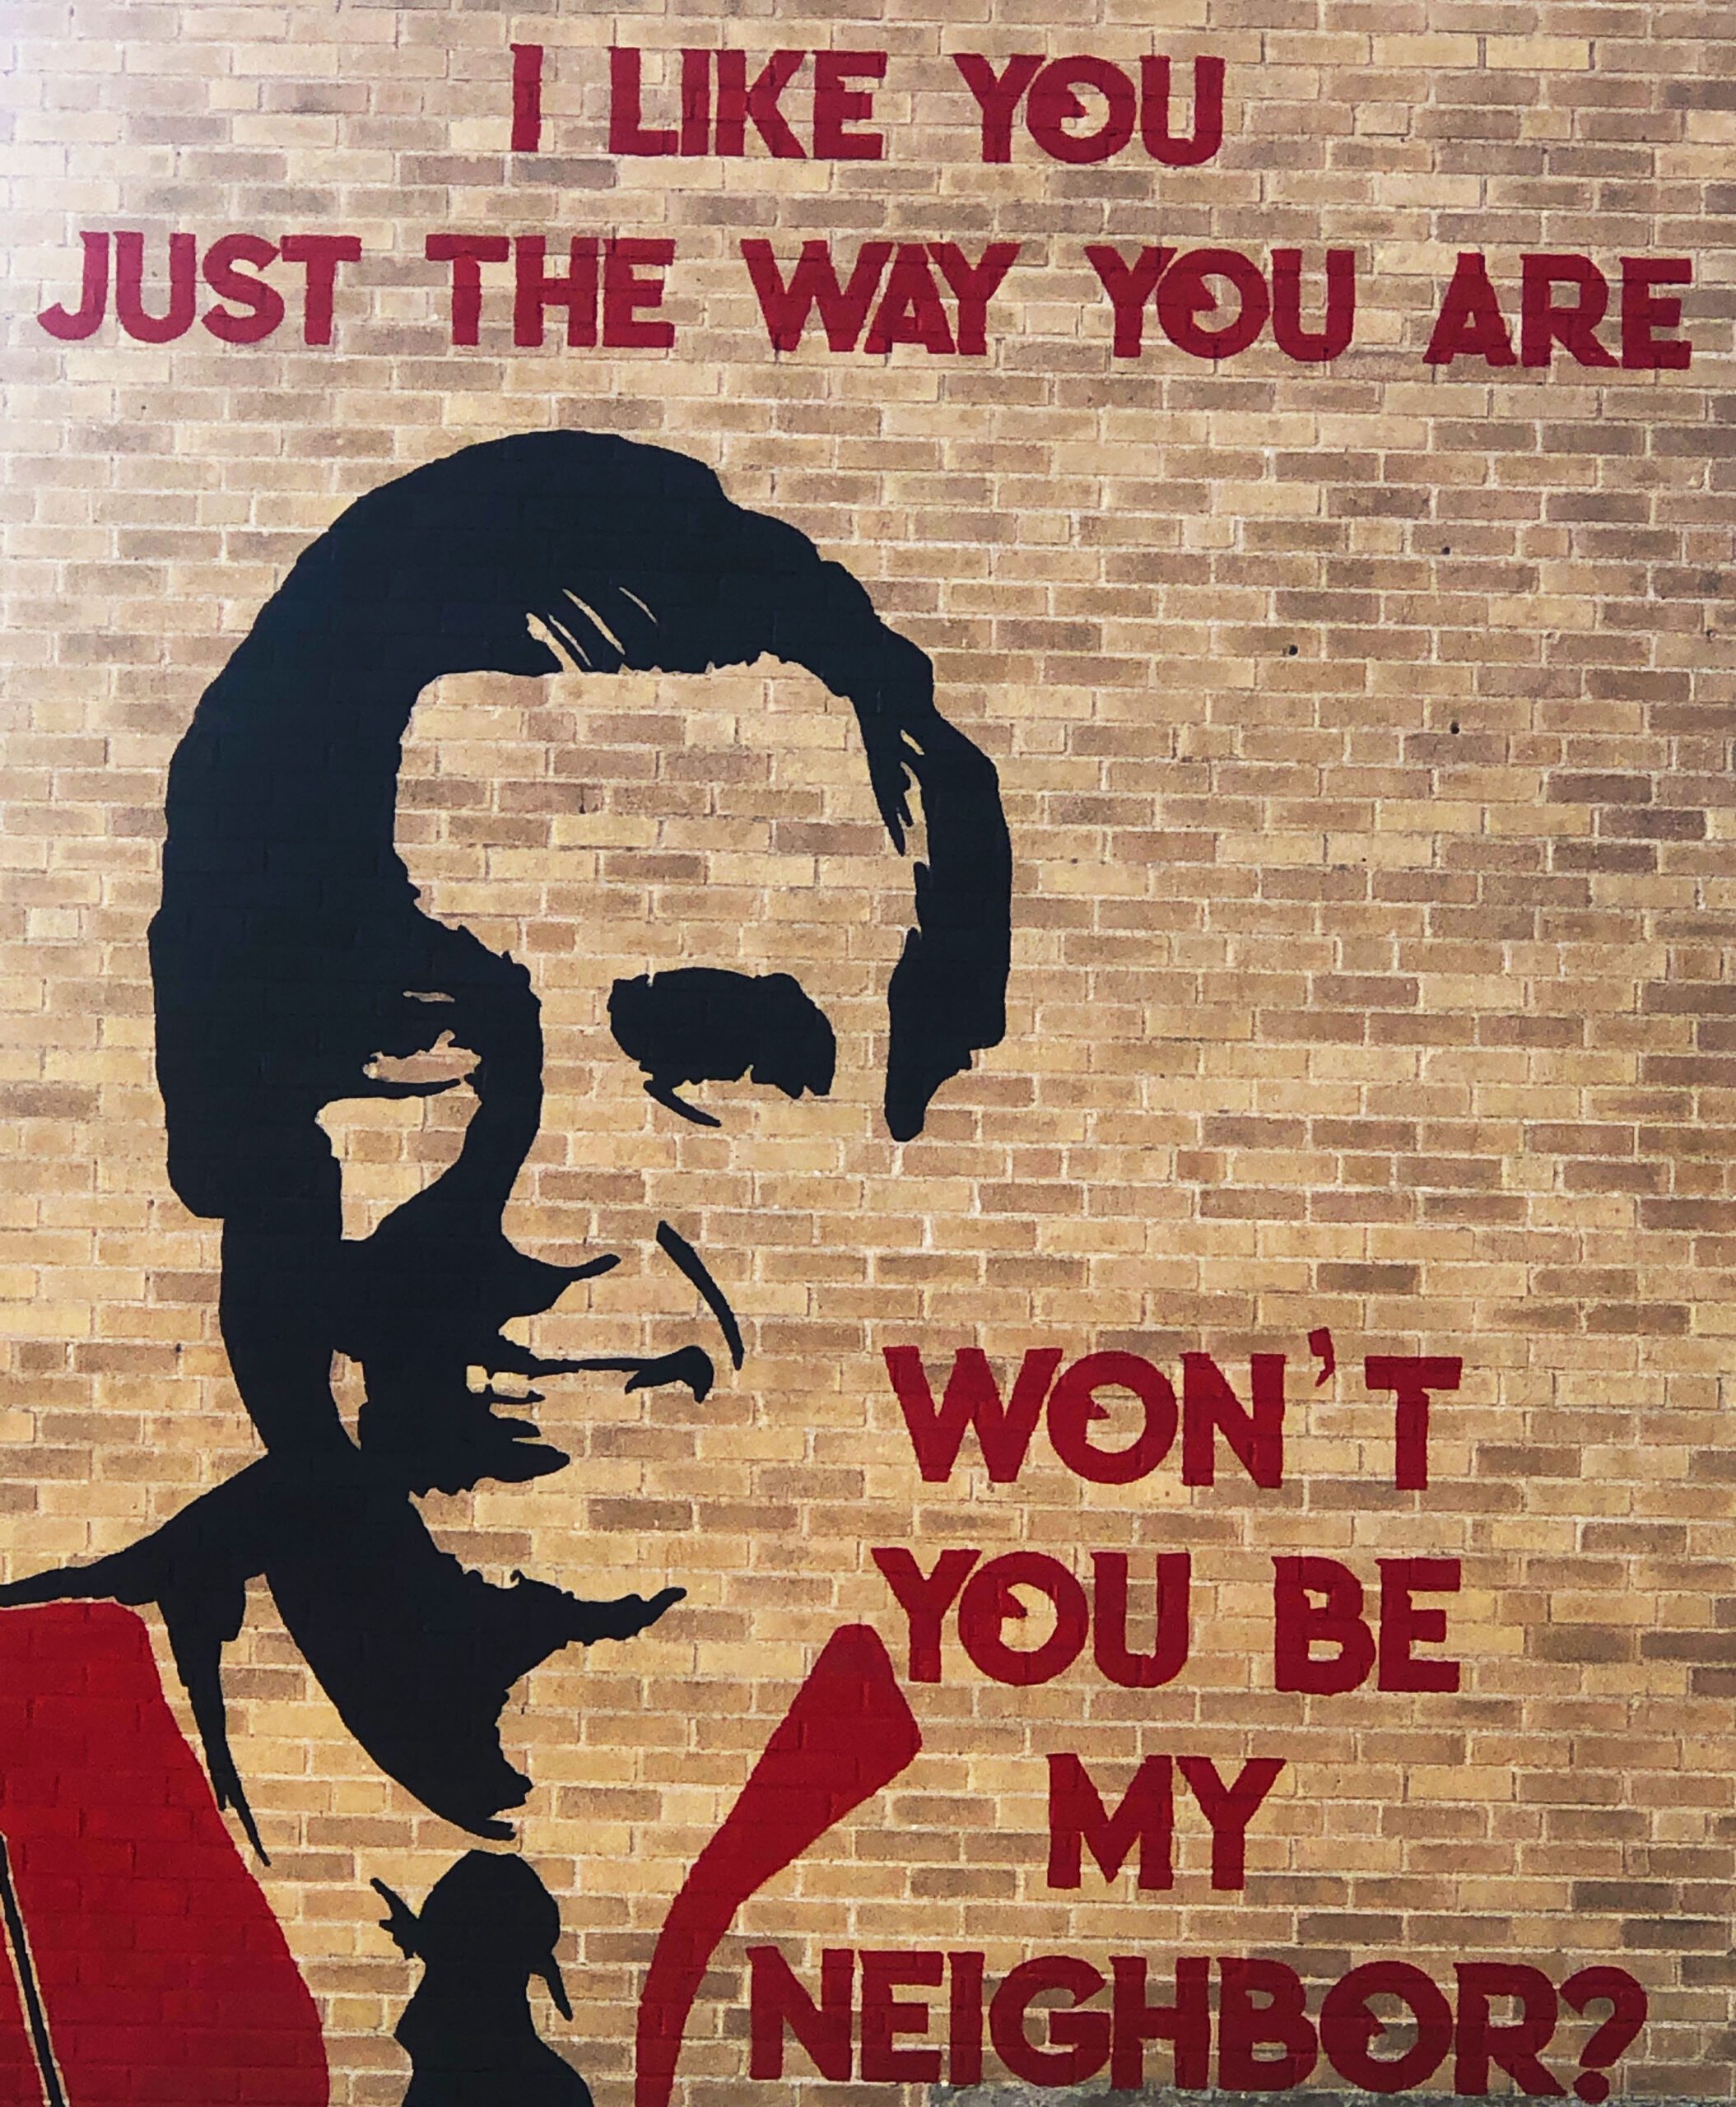 be-my-neighbor-mural-mr-rogers-marion-illinois-downtown-marion-art